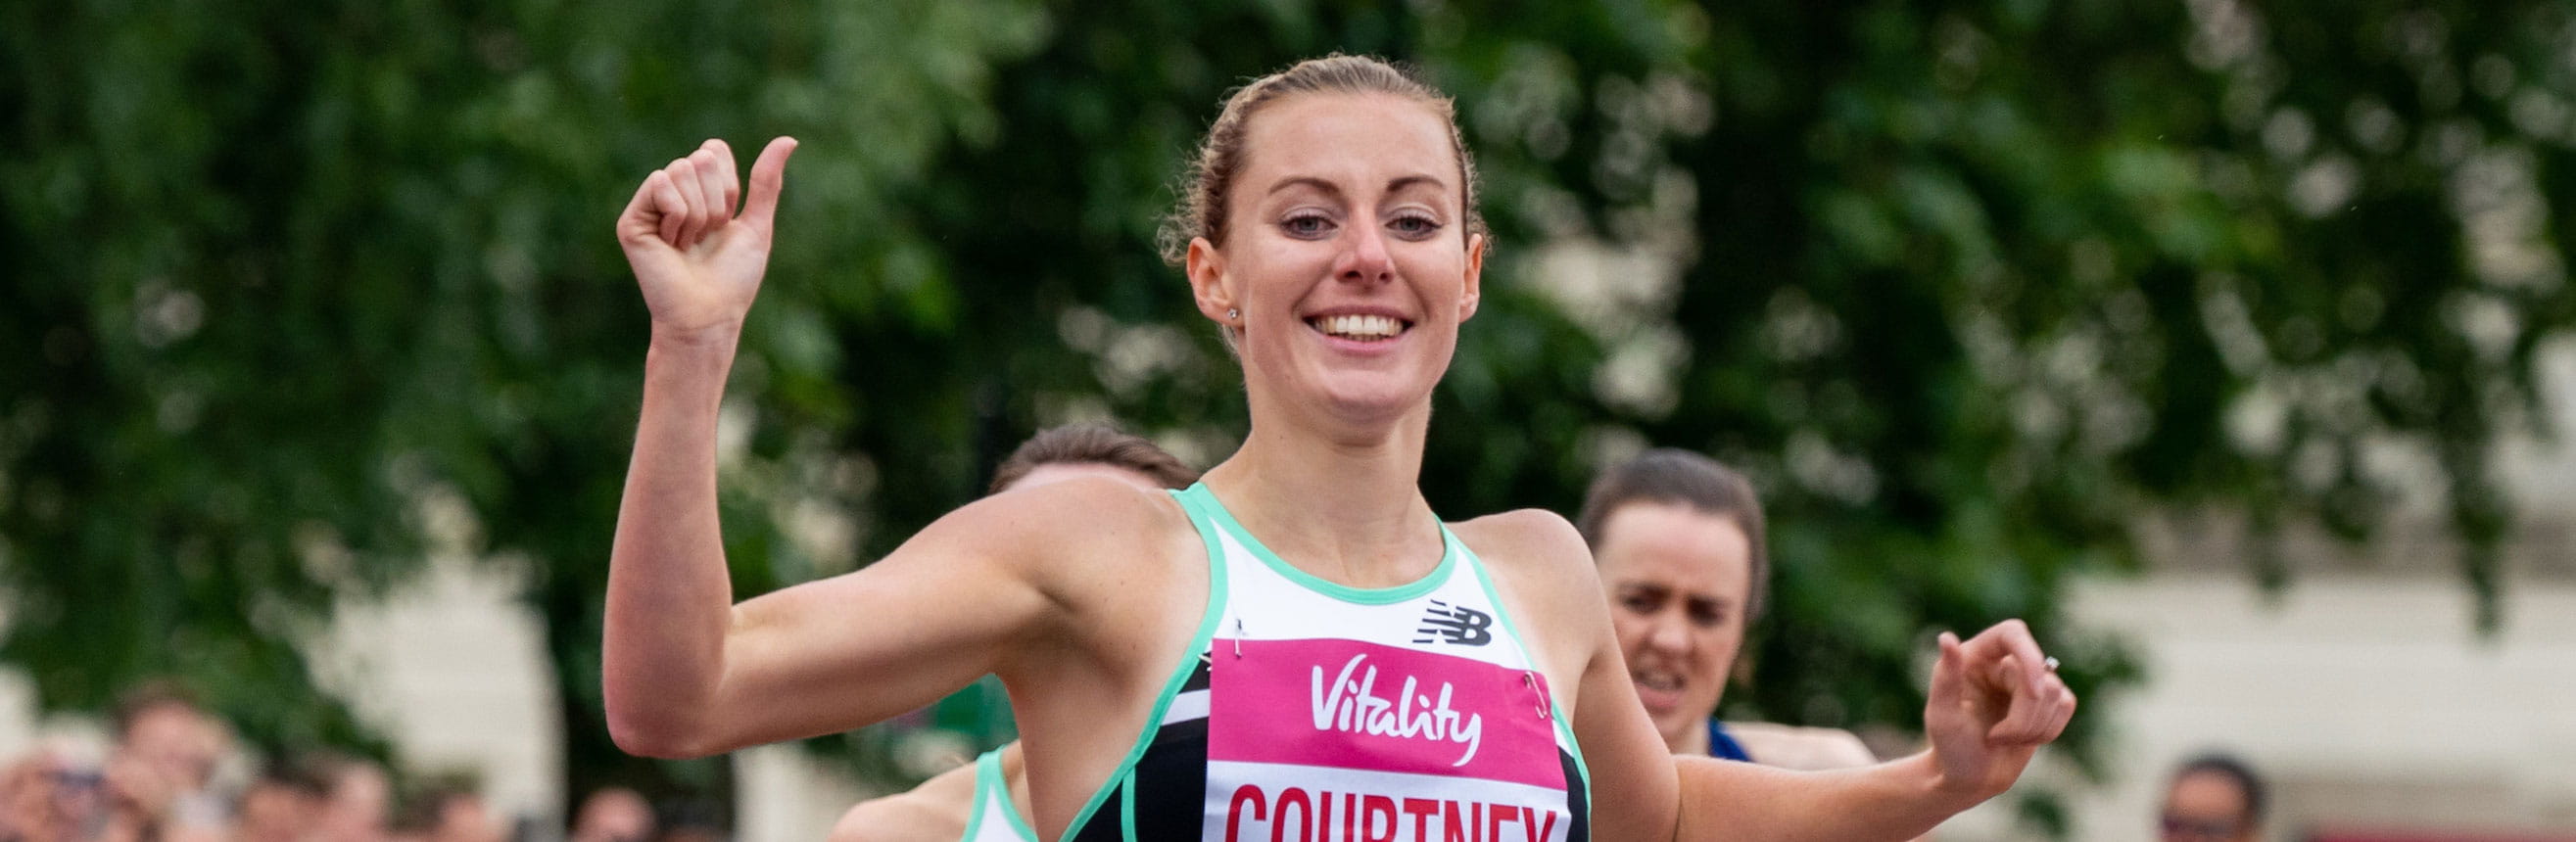 Melissa Courtney crosses the finish line to win the British Championship One Mile Road Race Senior Women as part of The Vitality Westminster Mile